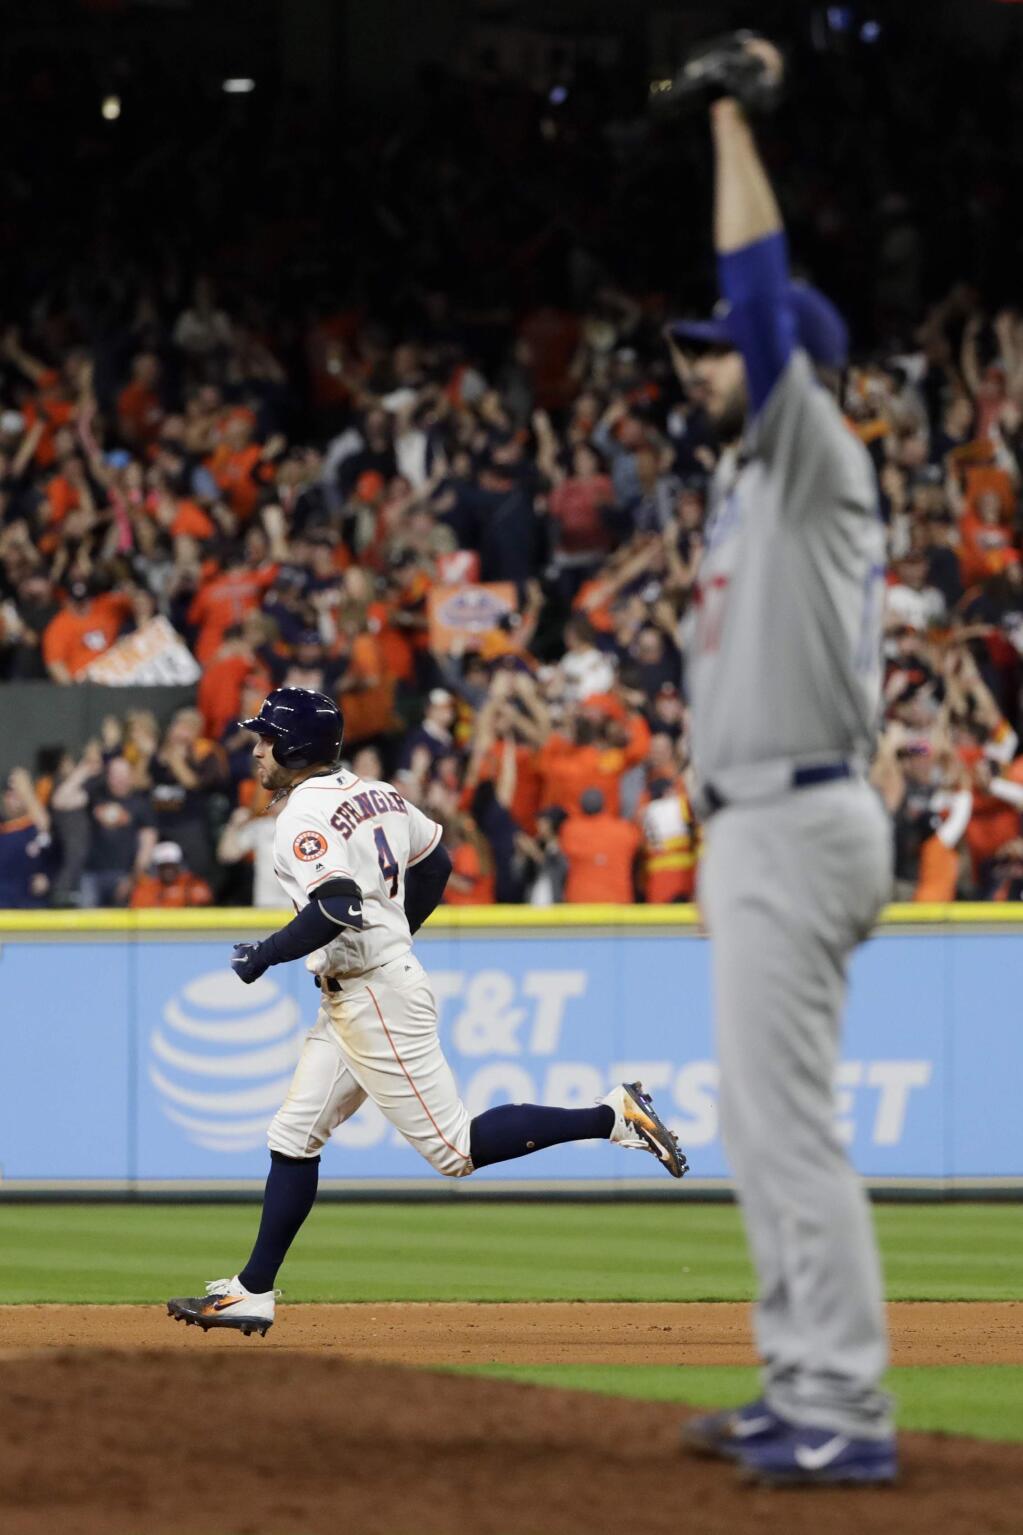 Houston Astros' George Springer hits a home run off Los Angeles Dodgers relief pitcher Brandon Morrow during the seventh inning of Game 5 of baseball's World Series Sunday, Oct. 29, 2017, in Houston. (AP Photo/Matt Slocum)